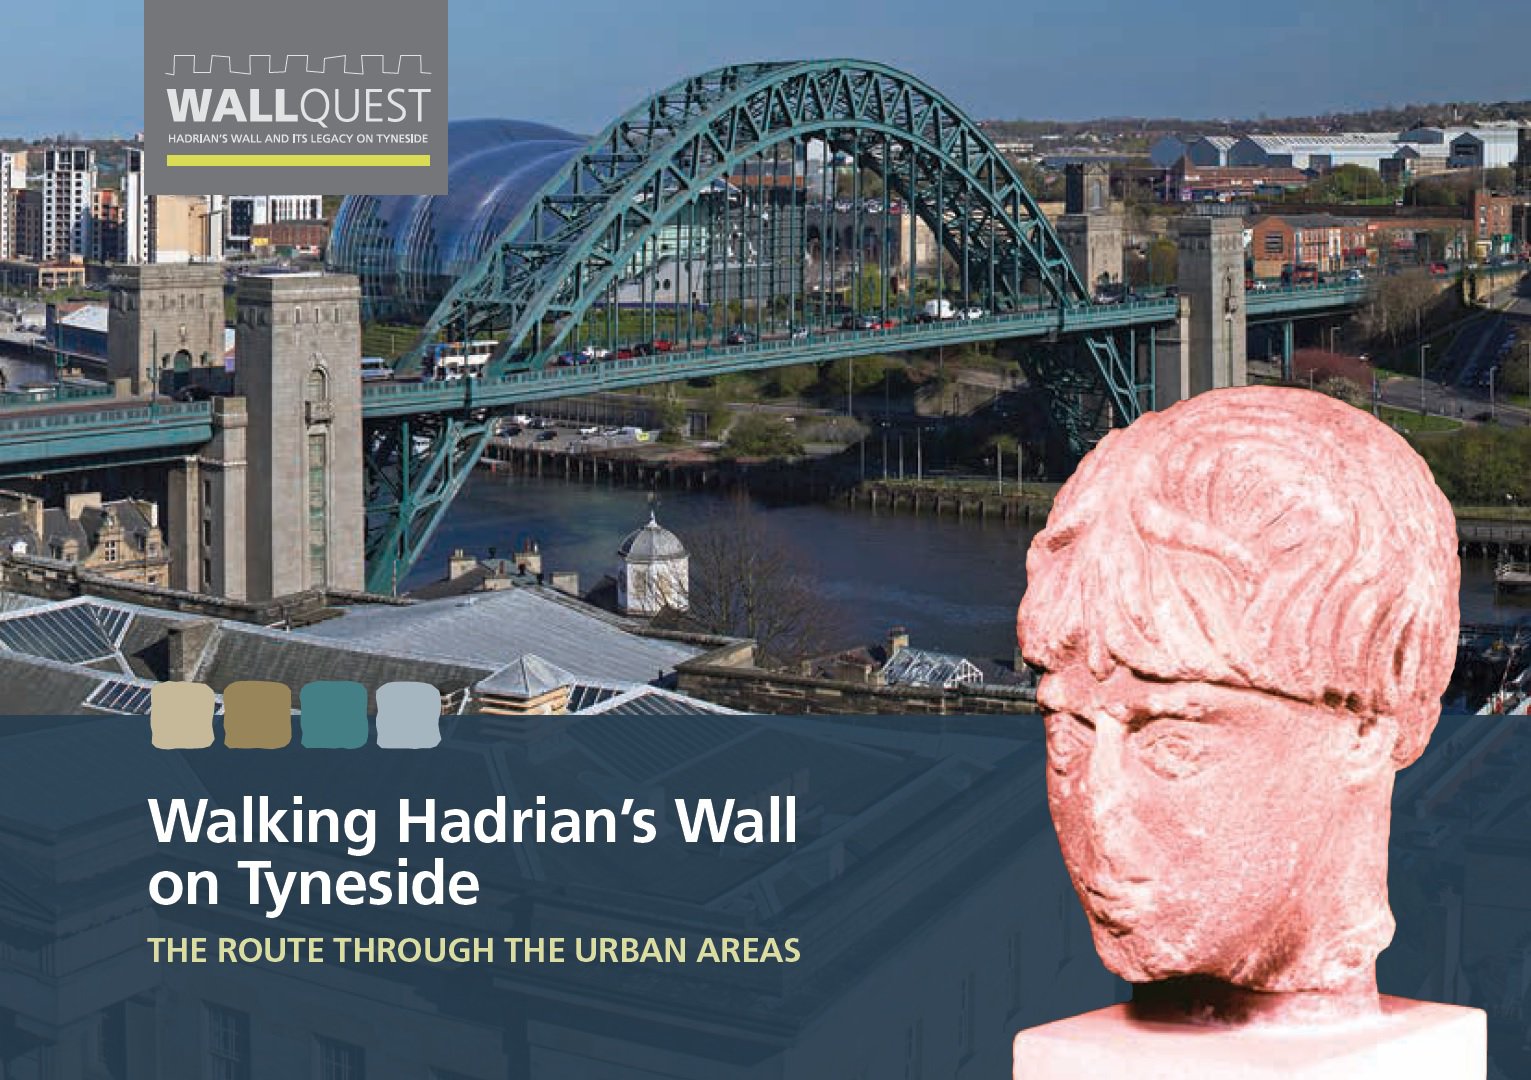 Cover of a book showing the Tyne Bridge and stone statue head of Antenociticus